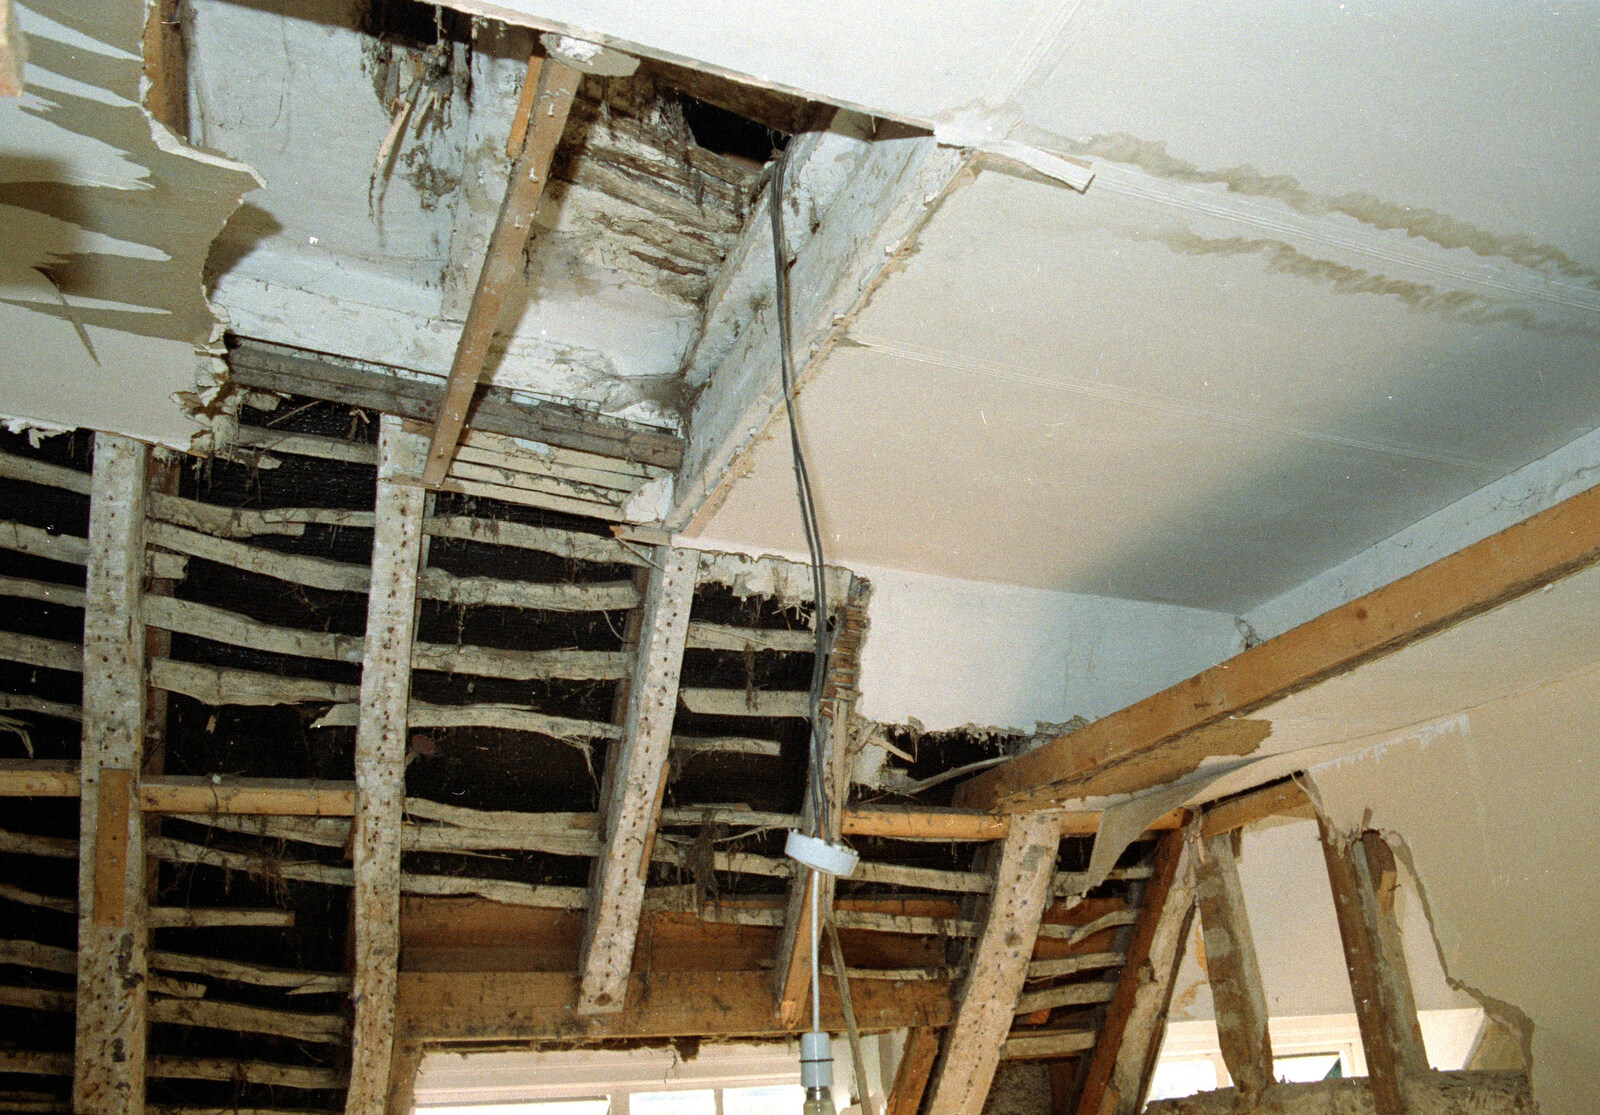 Multiple ceilings from Bedroom Demolition, Brome, Suffolk - 10th October 1994